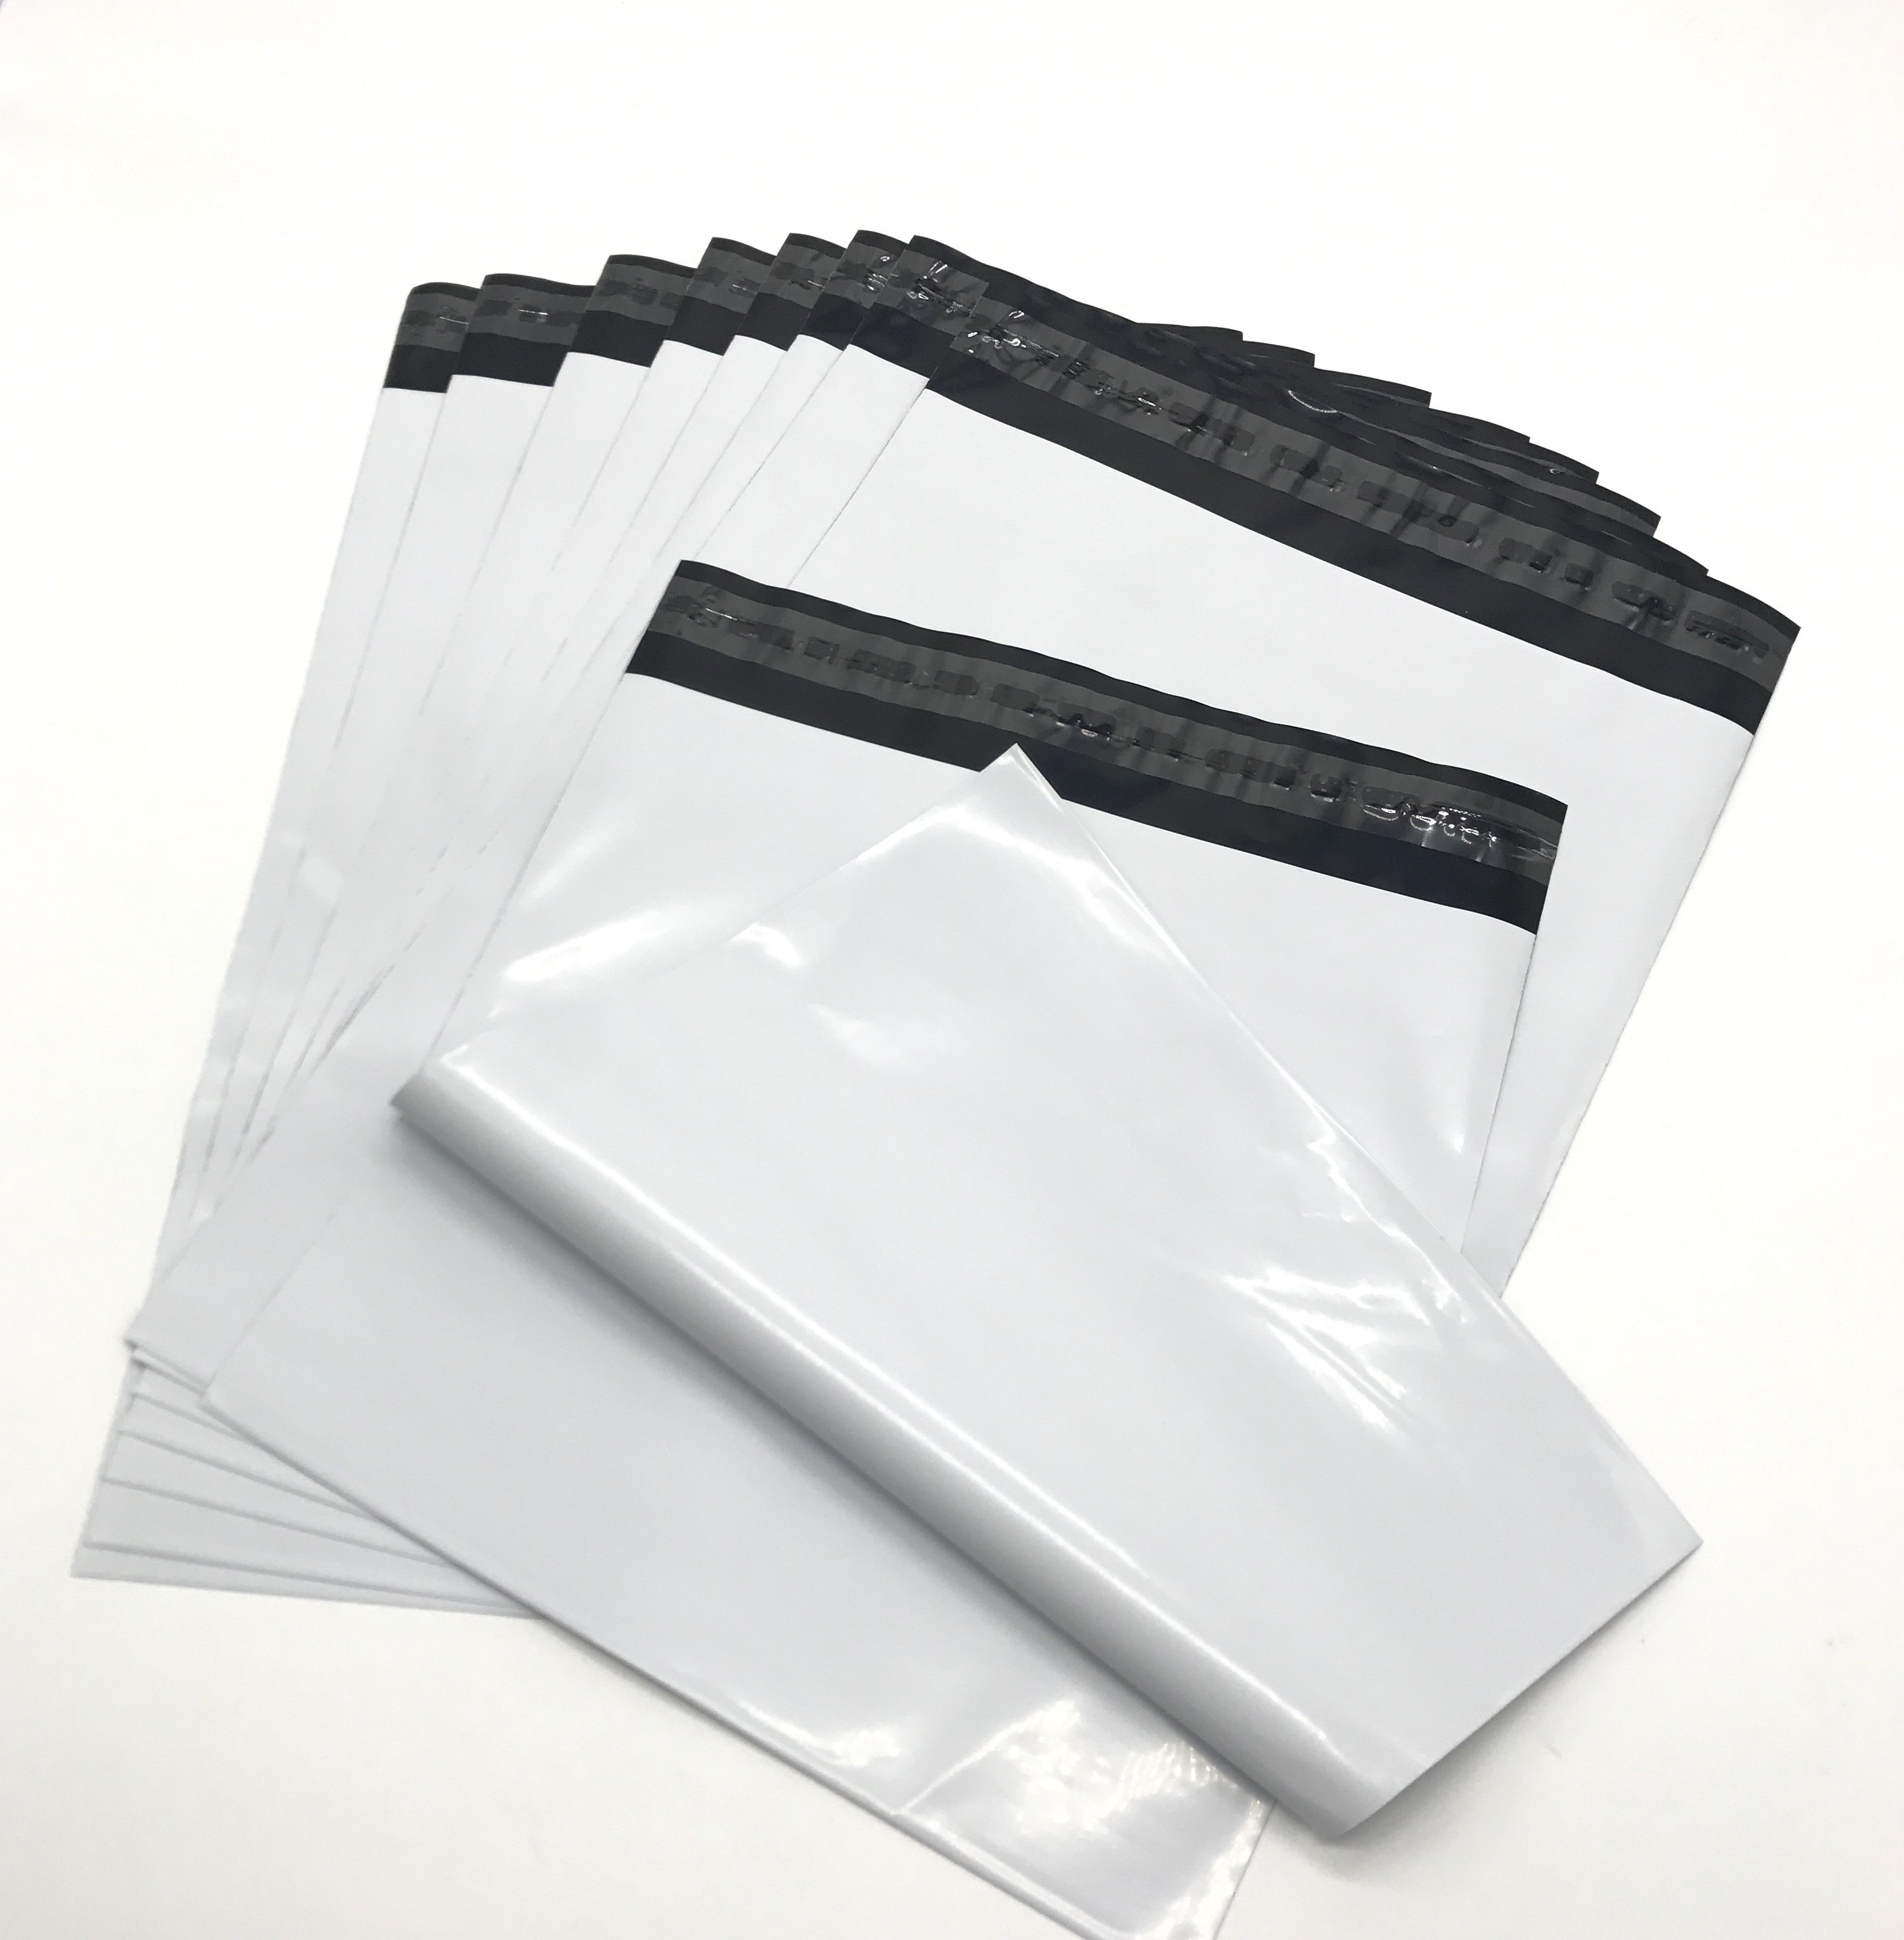 Quality 6 Micron Waterproof Self Adhesive LDPE Poly Mailer Bags for sale